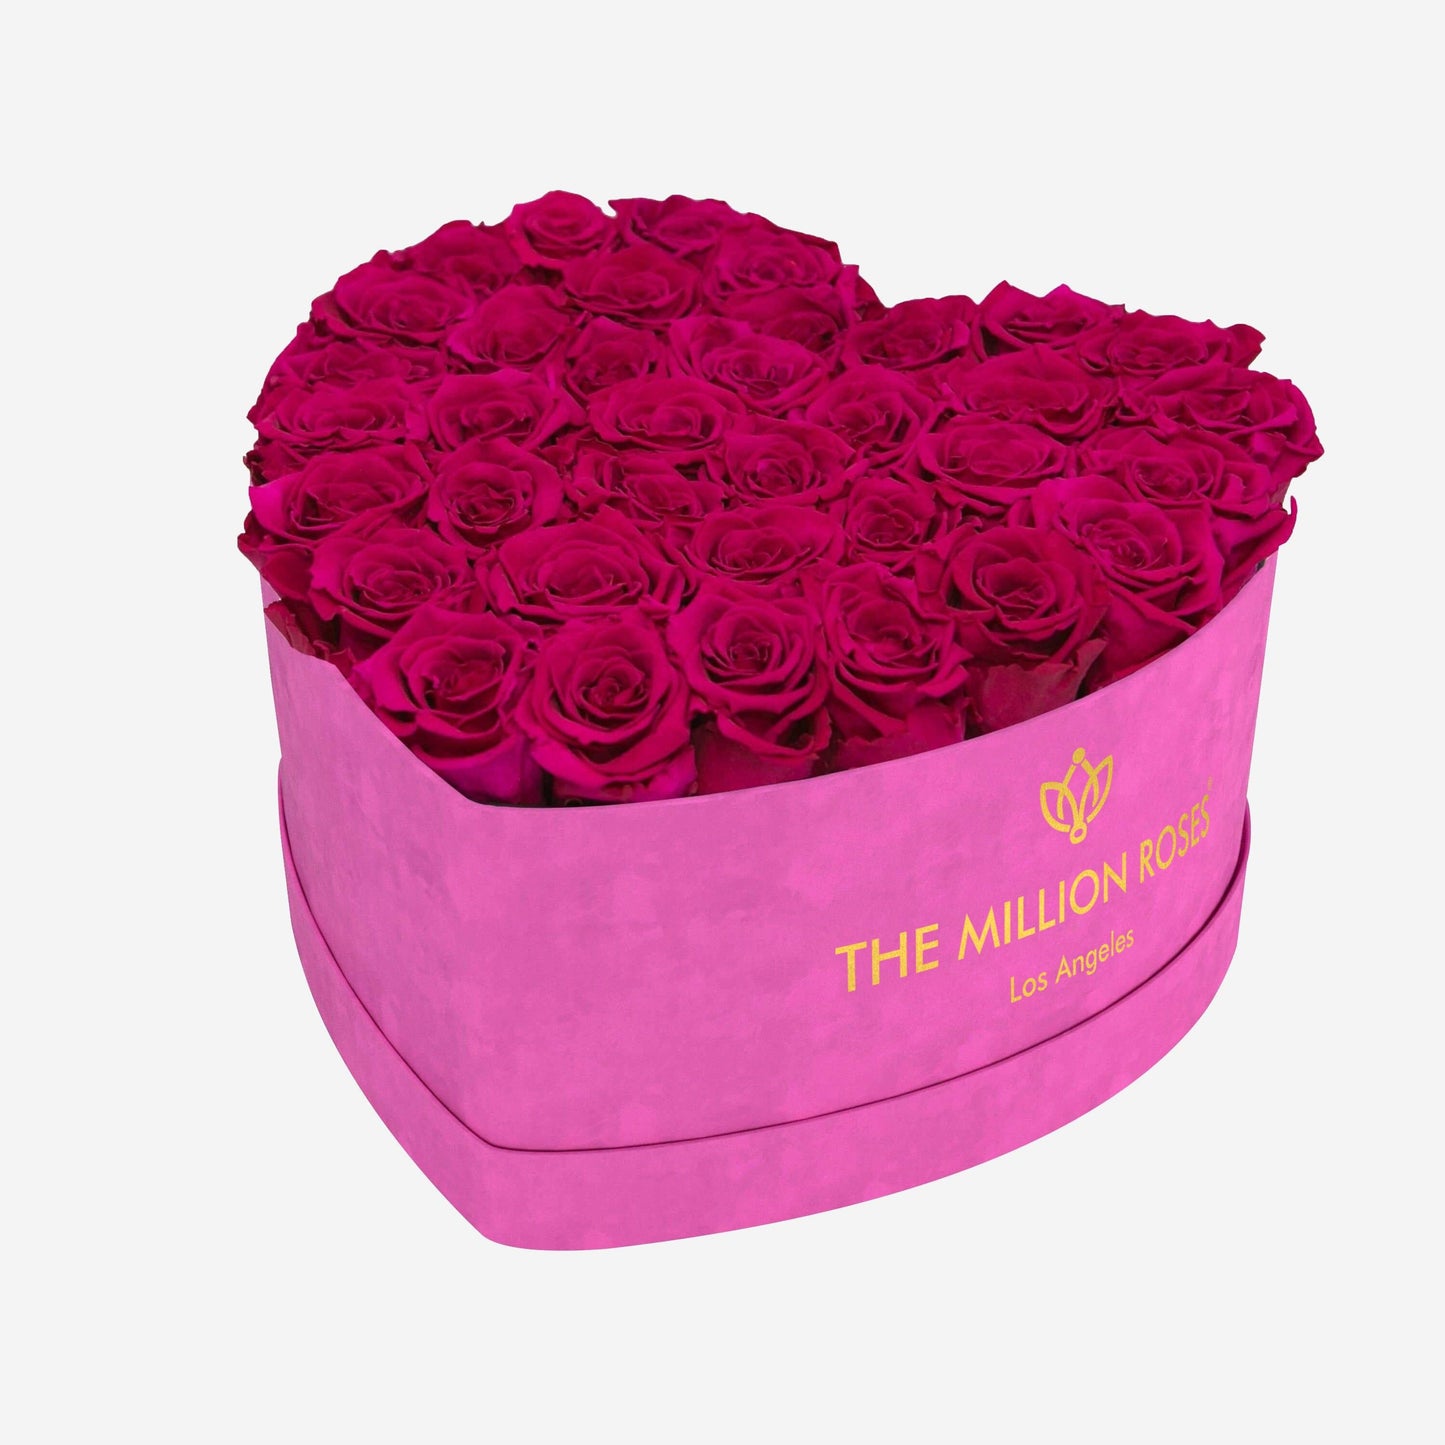 Heart Hot Pink Suede Box | Magenta Roses - The Million Roses